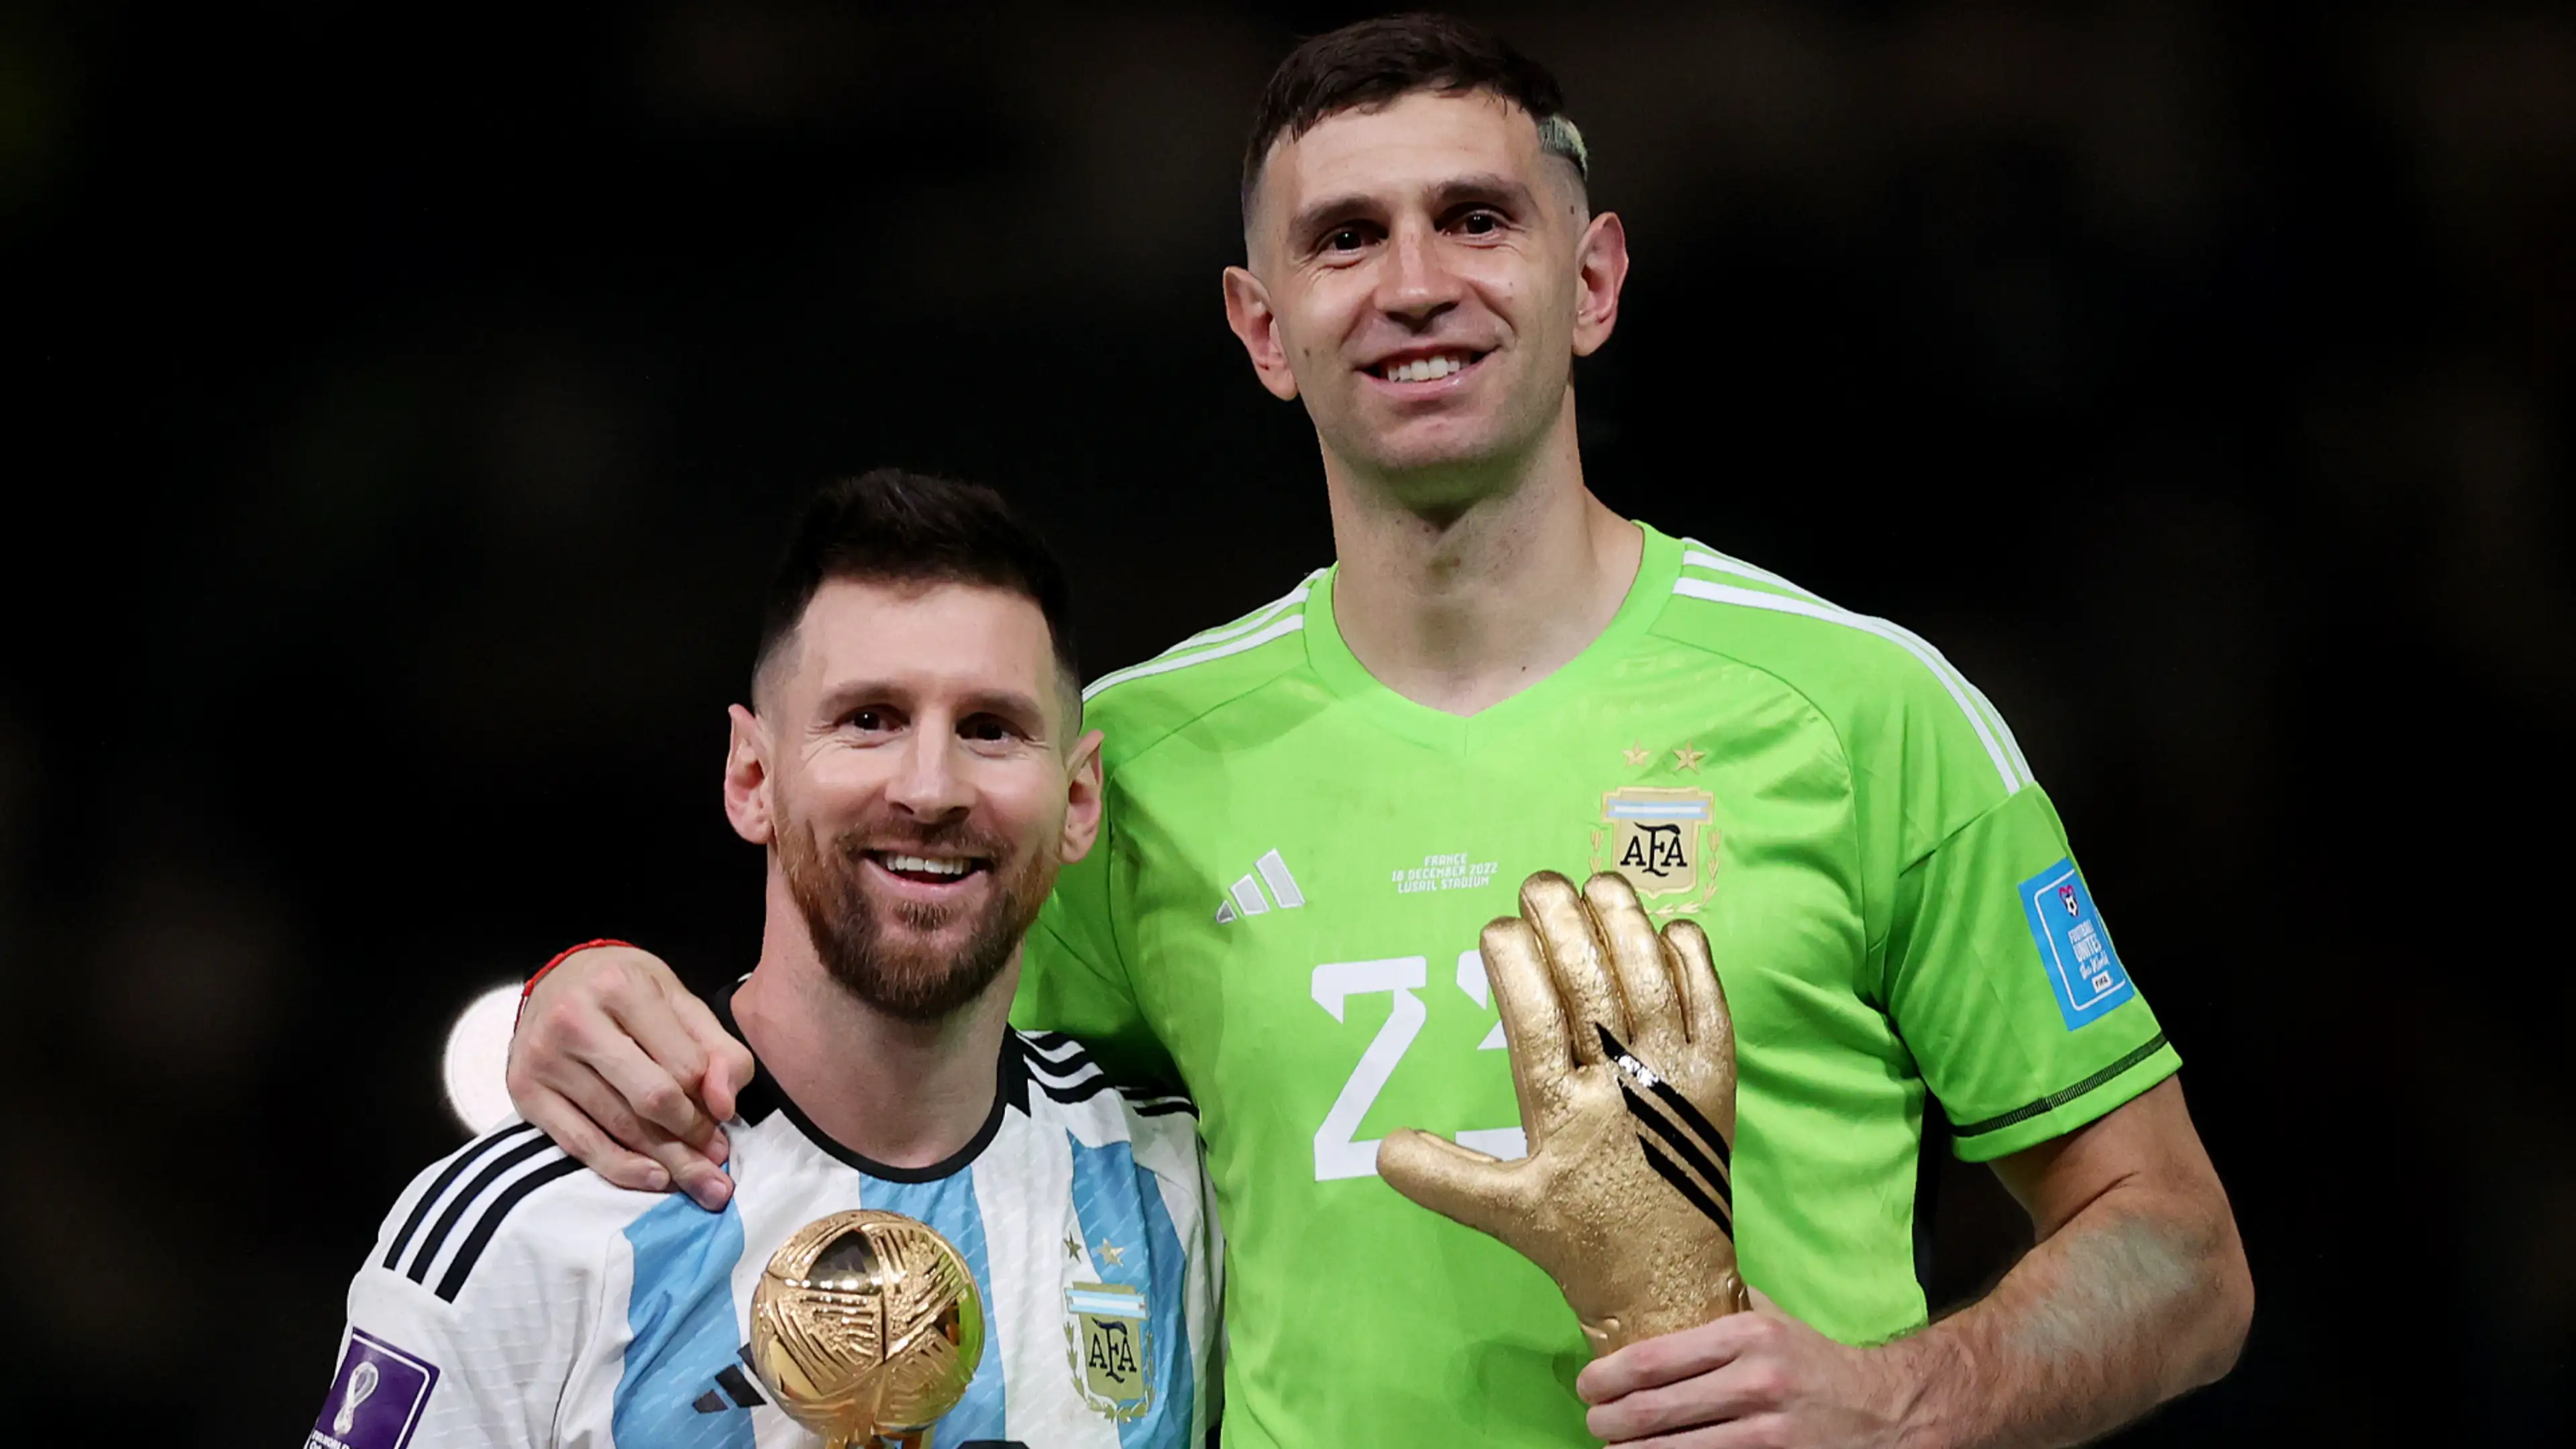 Emiliano Martínez Believes Messi Will Win The Ballon d'Or Again